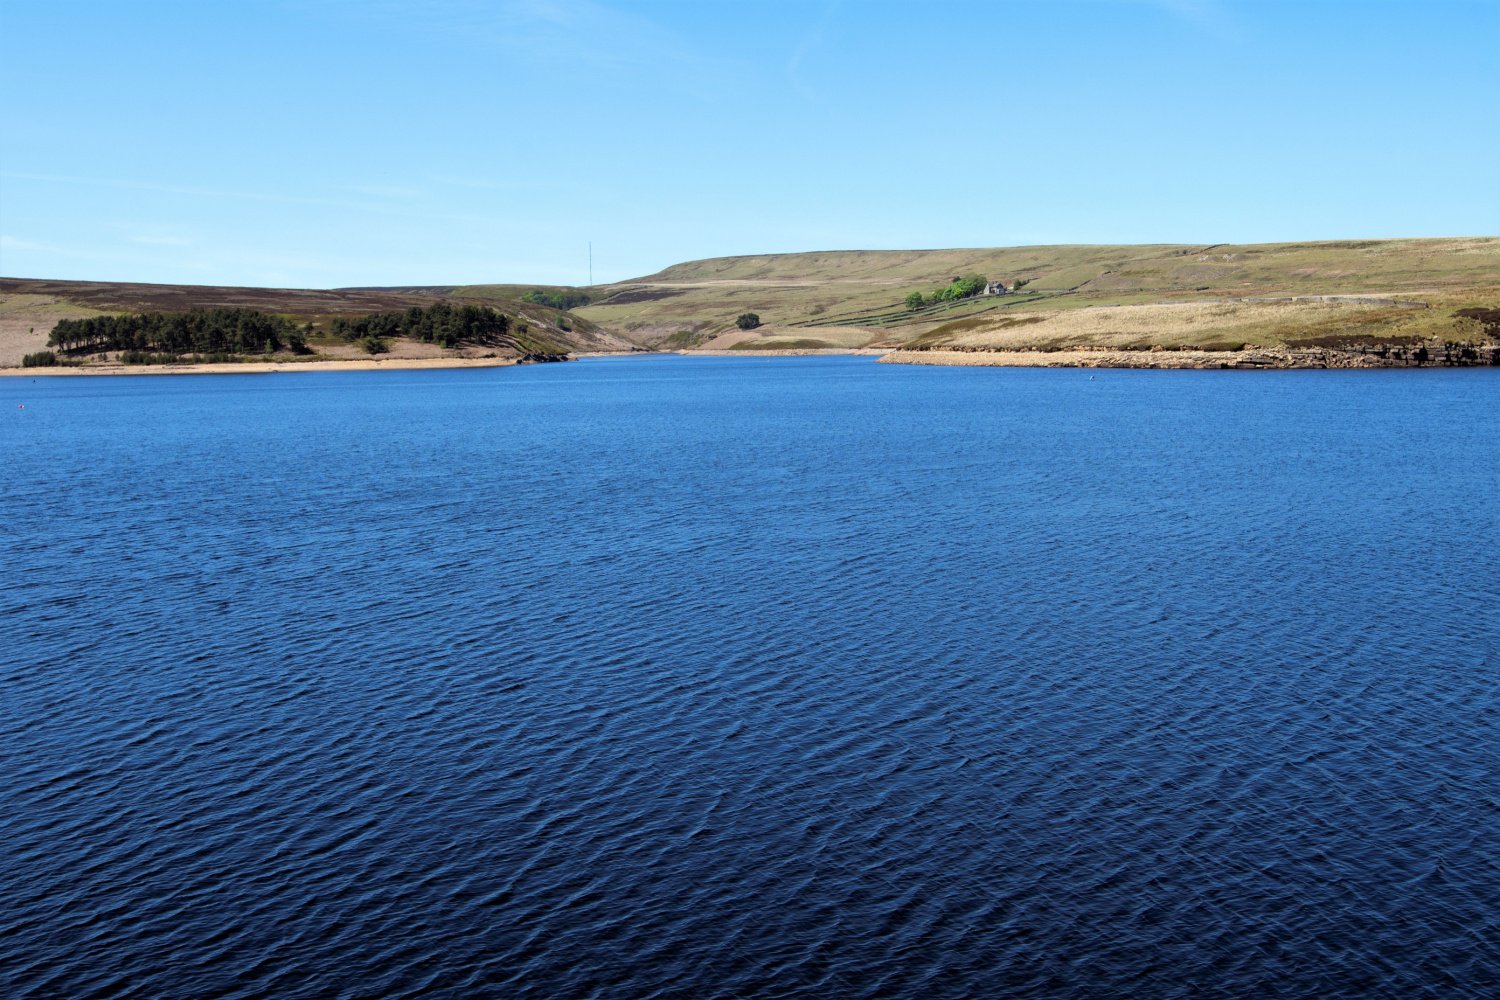 Image name winscar reservoir sheffield south yorkshire the 3 image from the post Walk: Winscar Reservoir in Yorkshire.com.